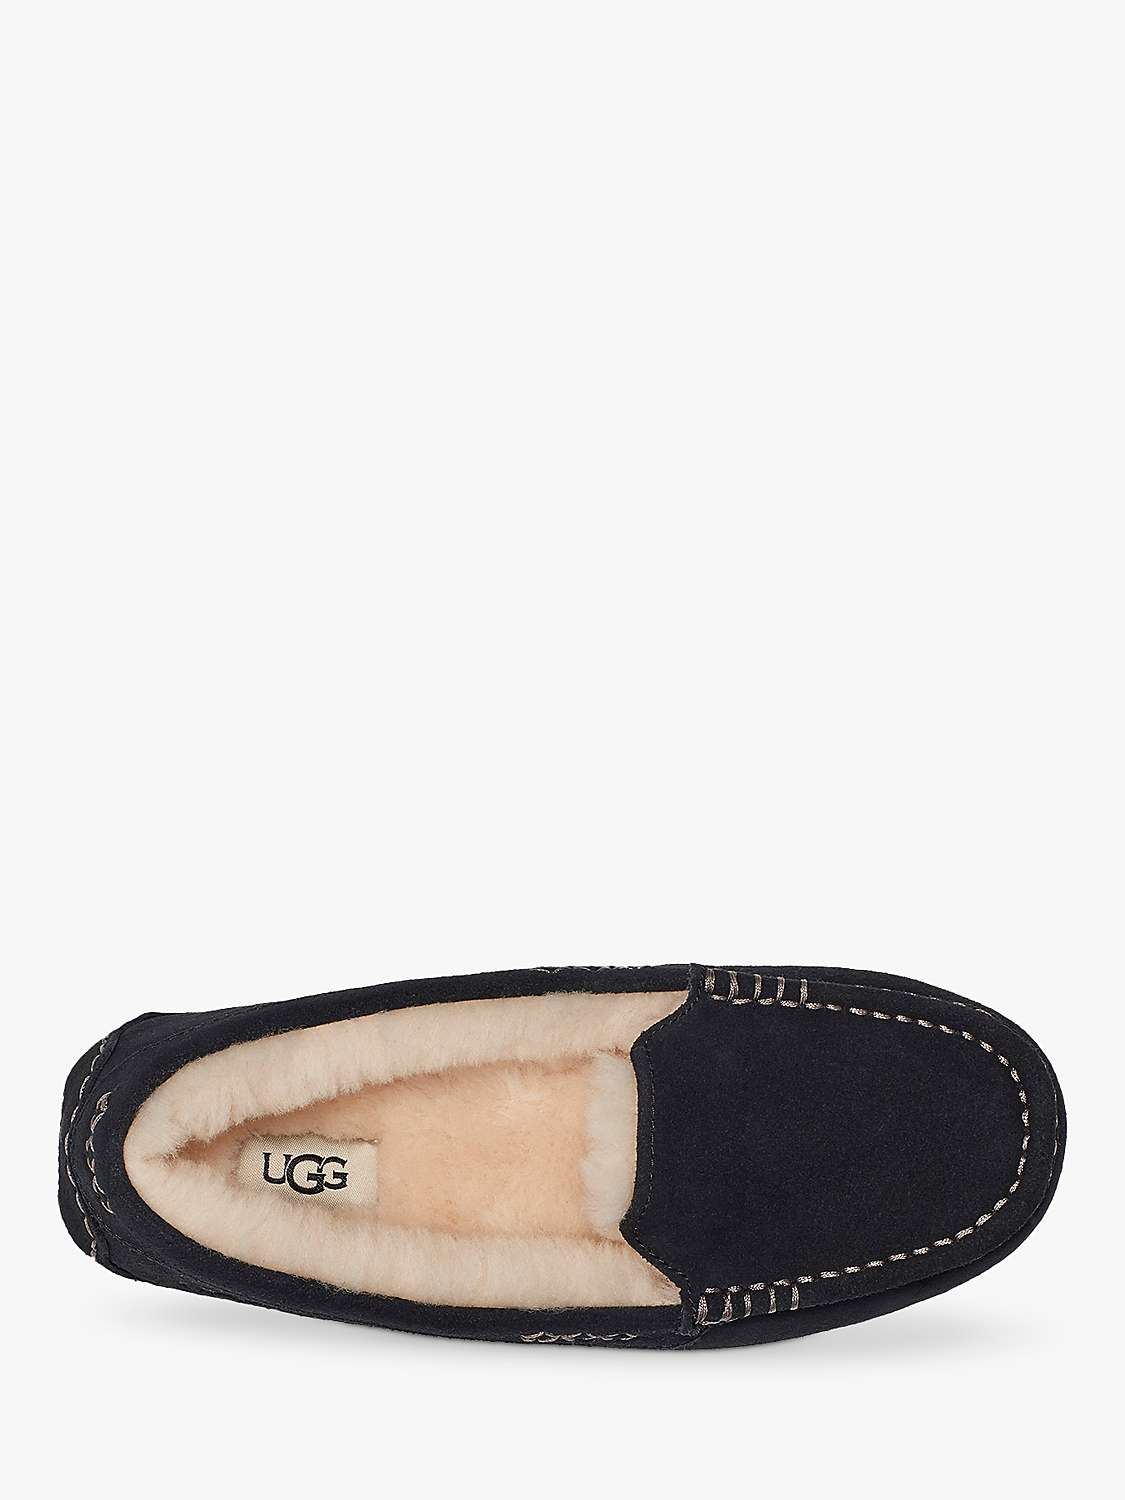 UGG Ansley Suede Moccasin Slippers, Black at John Lewis & Partners